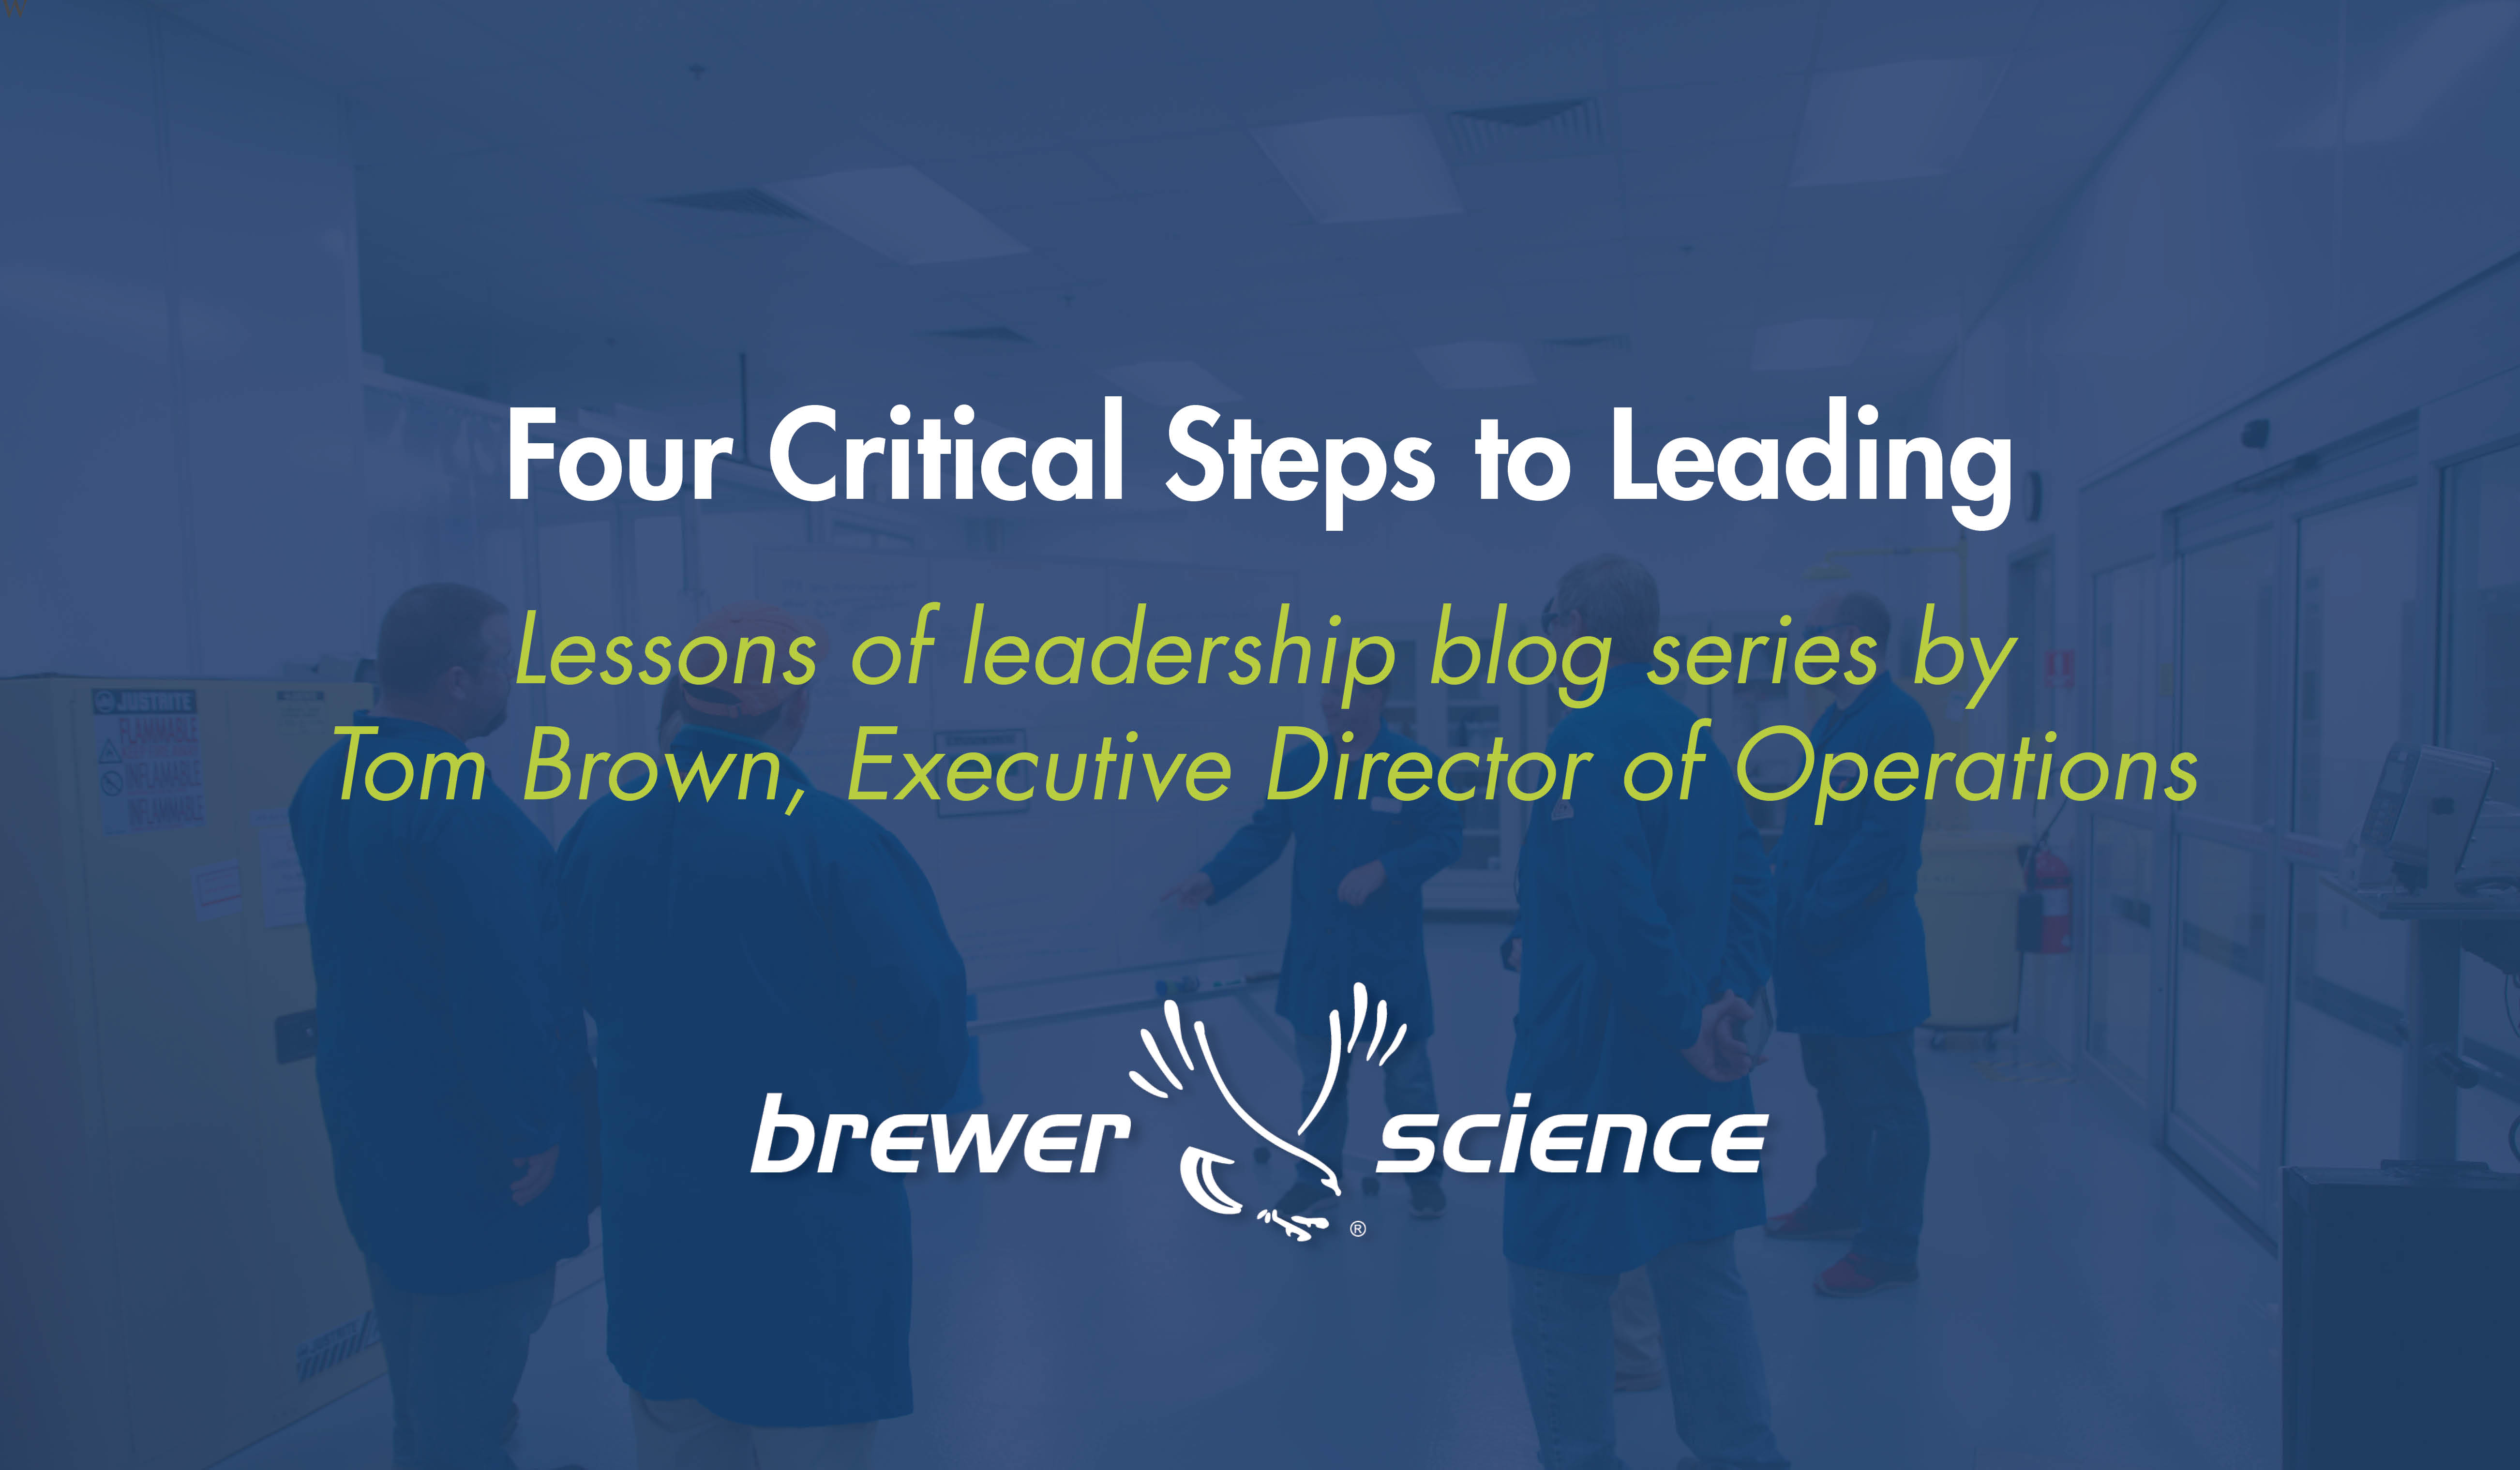 Four Critical Steps to Leading